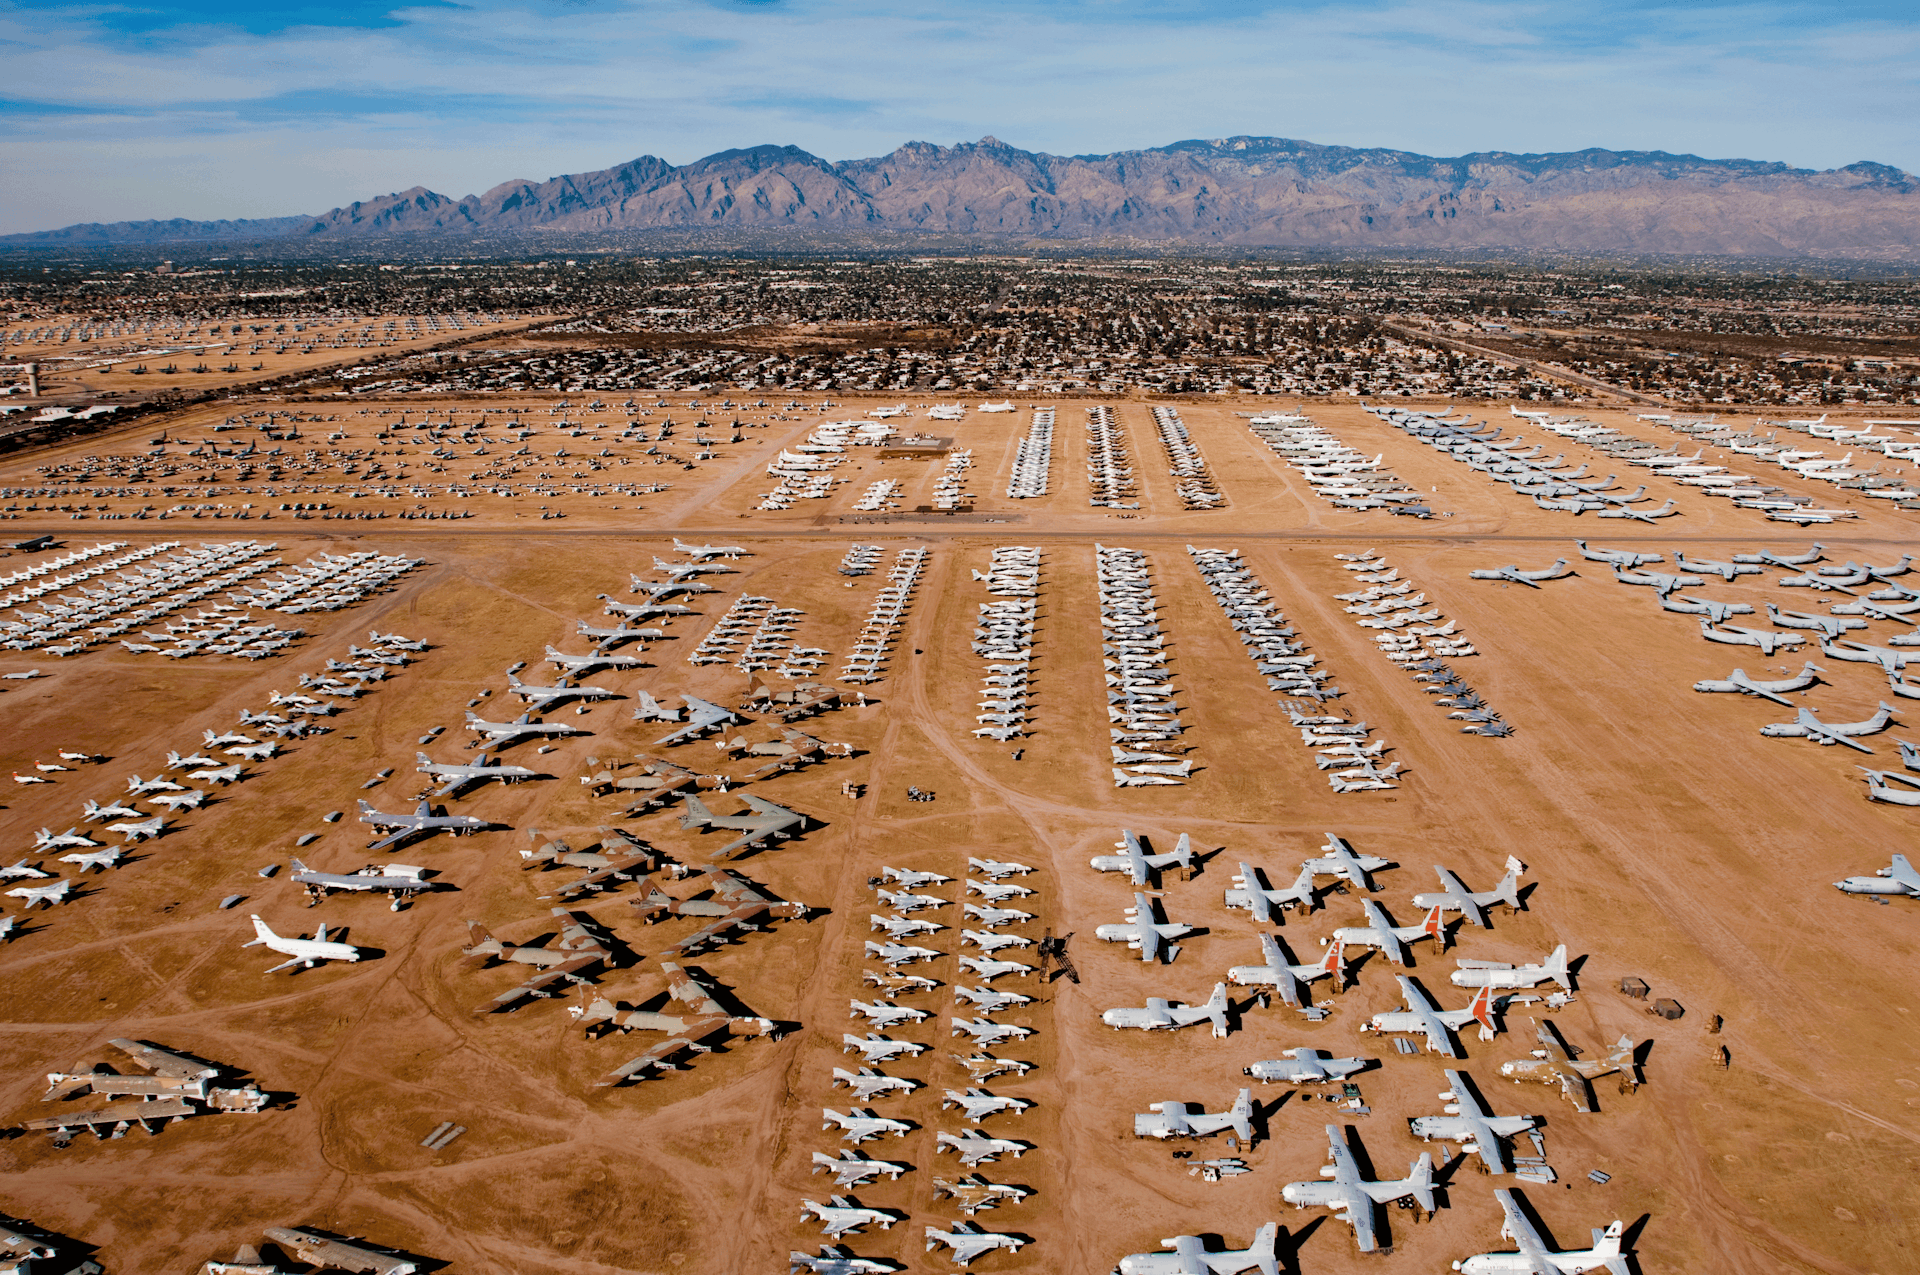 Planes are placed in formation in the desert in front of mountains © Steve Proehl / Getty Images 